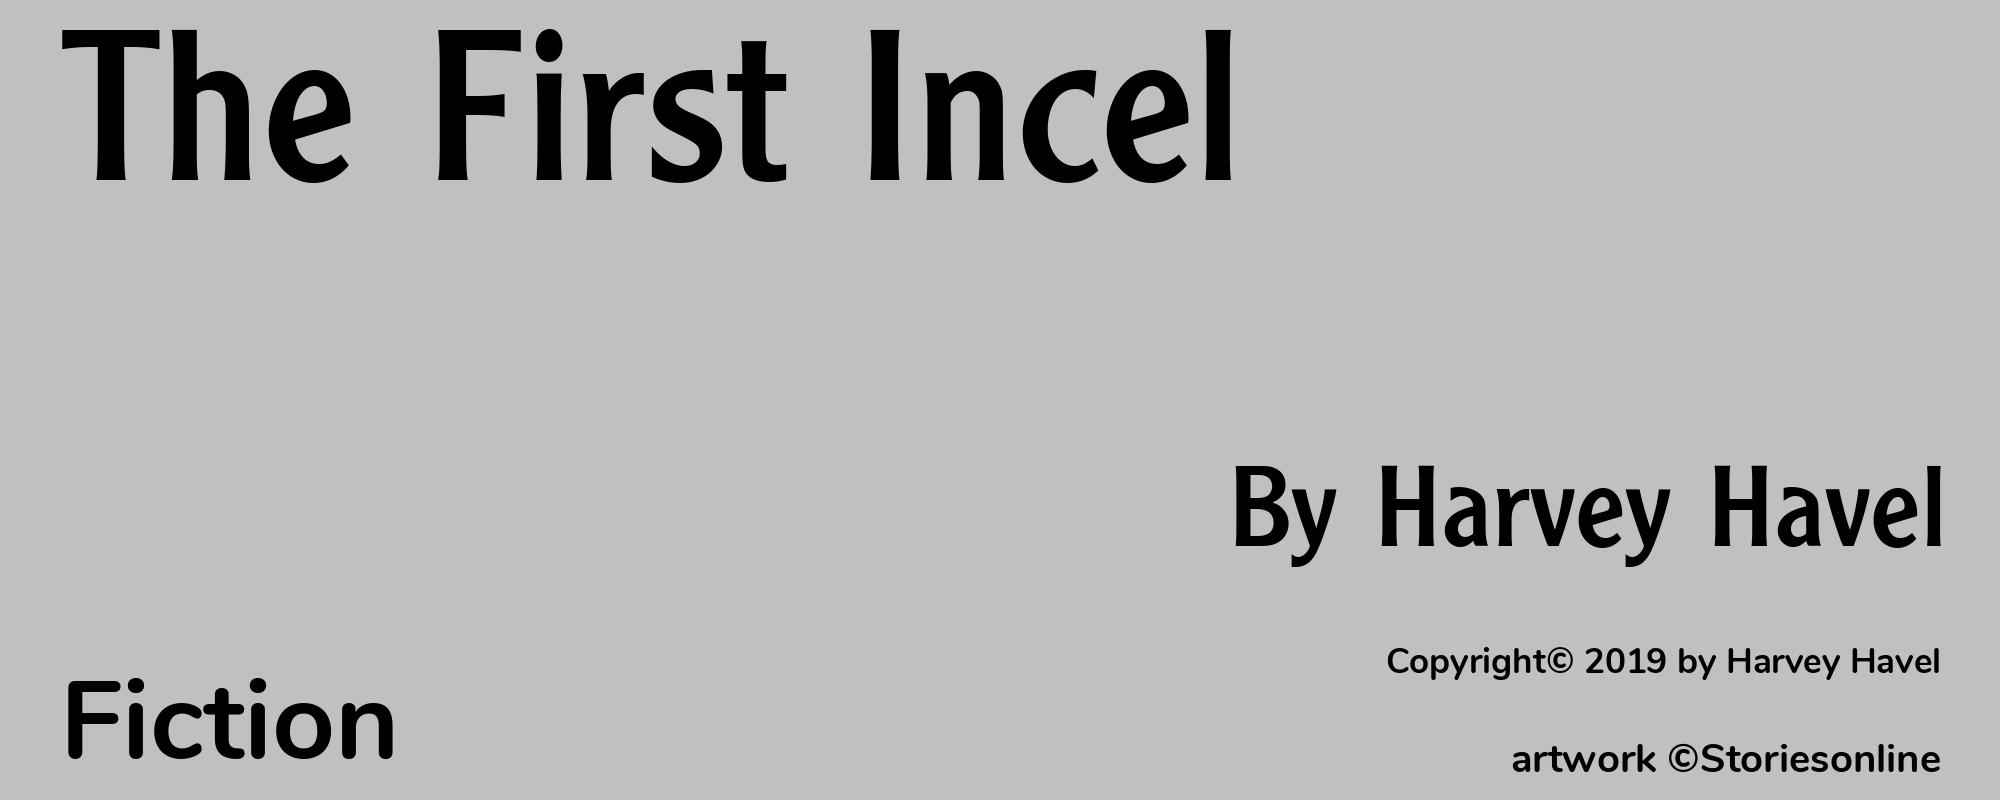 The First Incel - Cover